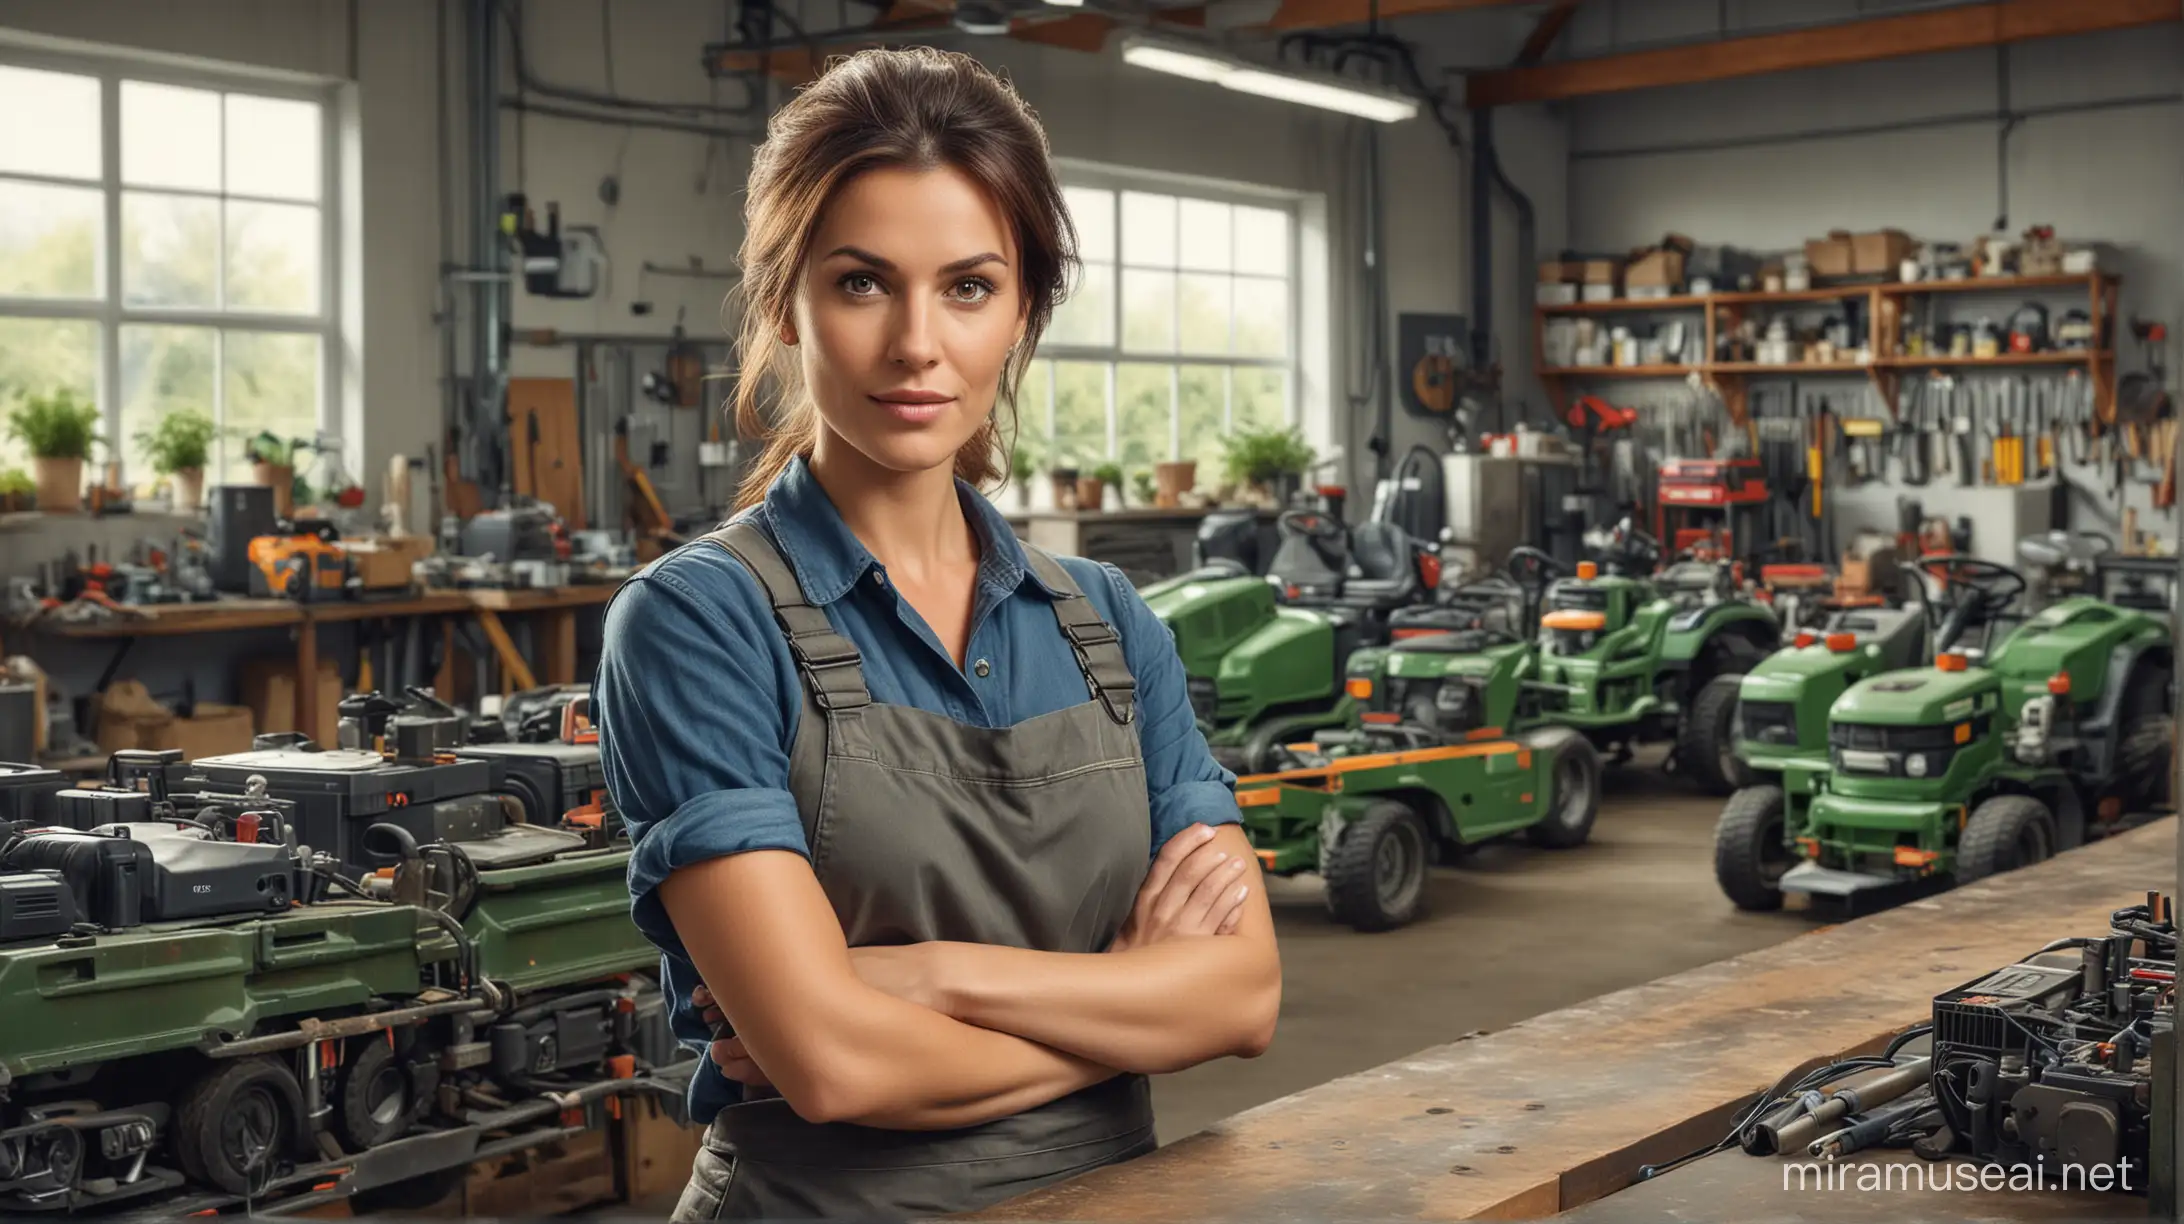 Describe a 35-year old handsome woman behind a counter of an organised industrial workshop, surrounded by lawn mowers and garden equipment, digital art